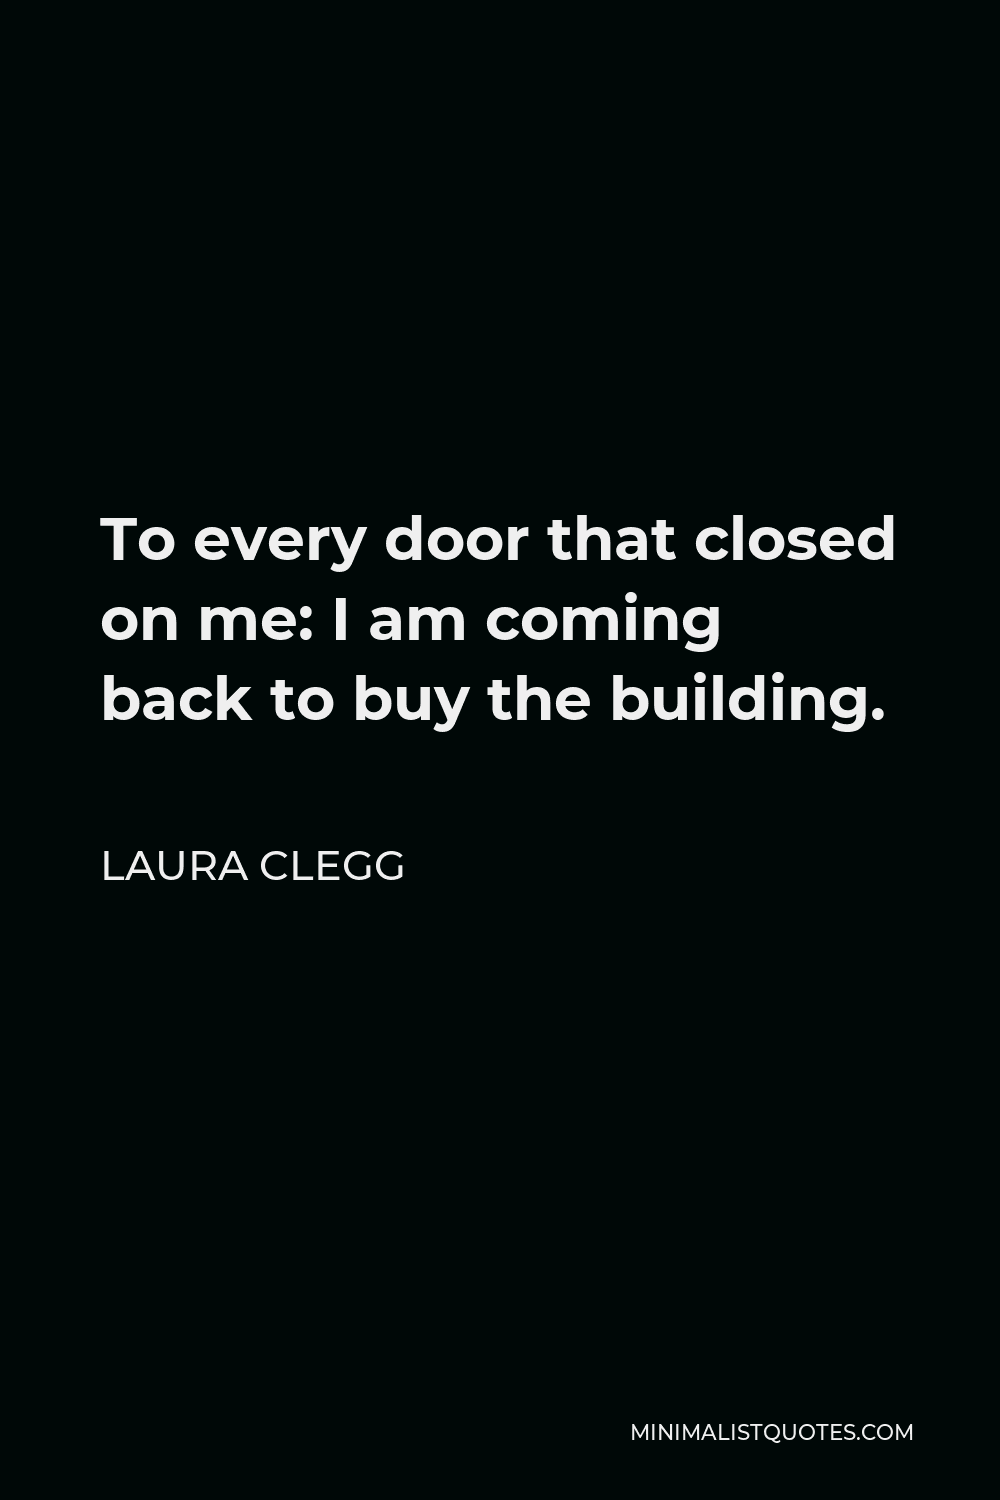 Laura Clegg Quote - To every door that closed on me: I am coming back to buy the building.